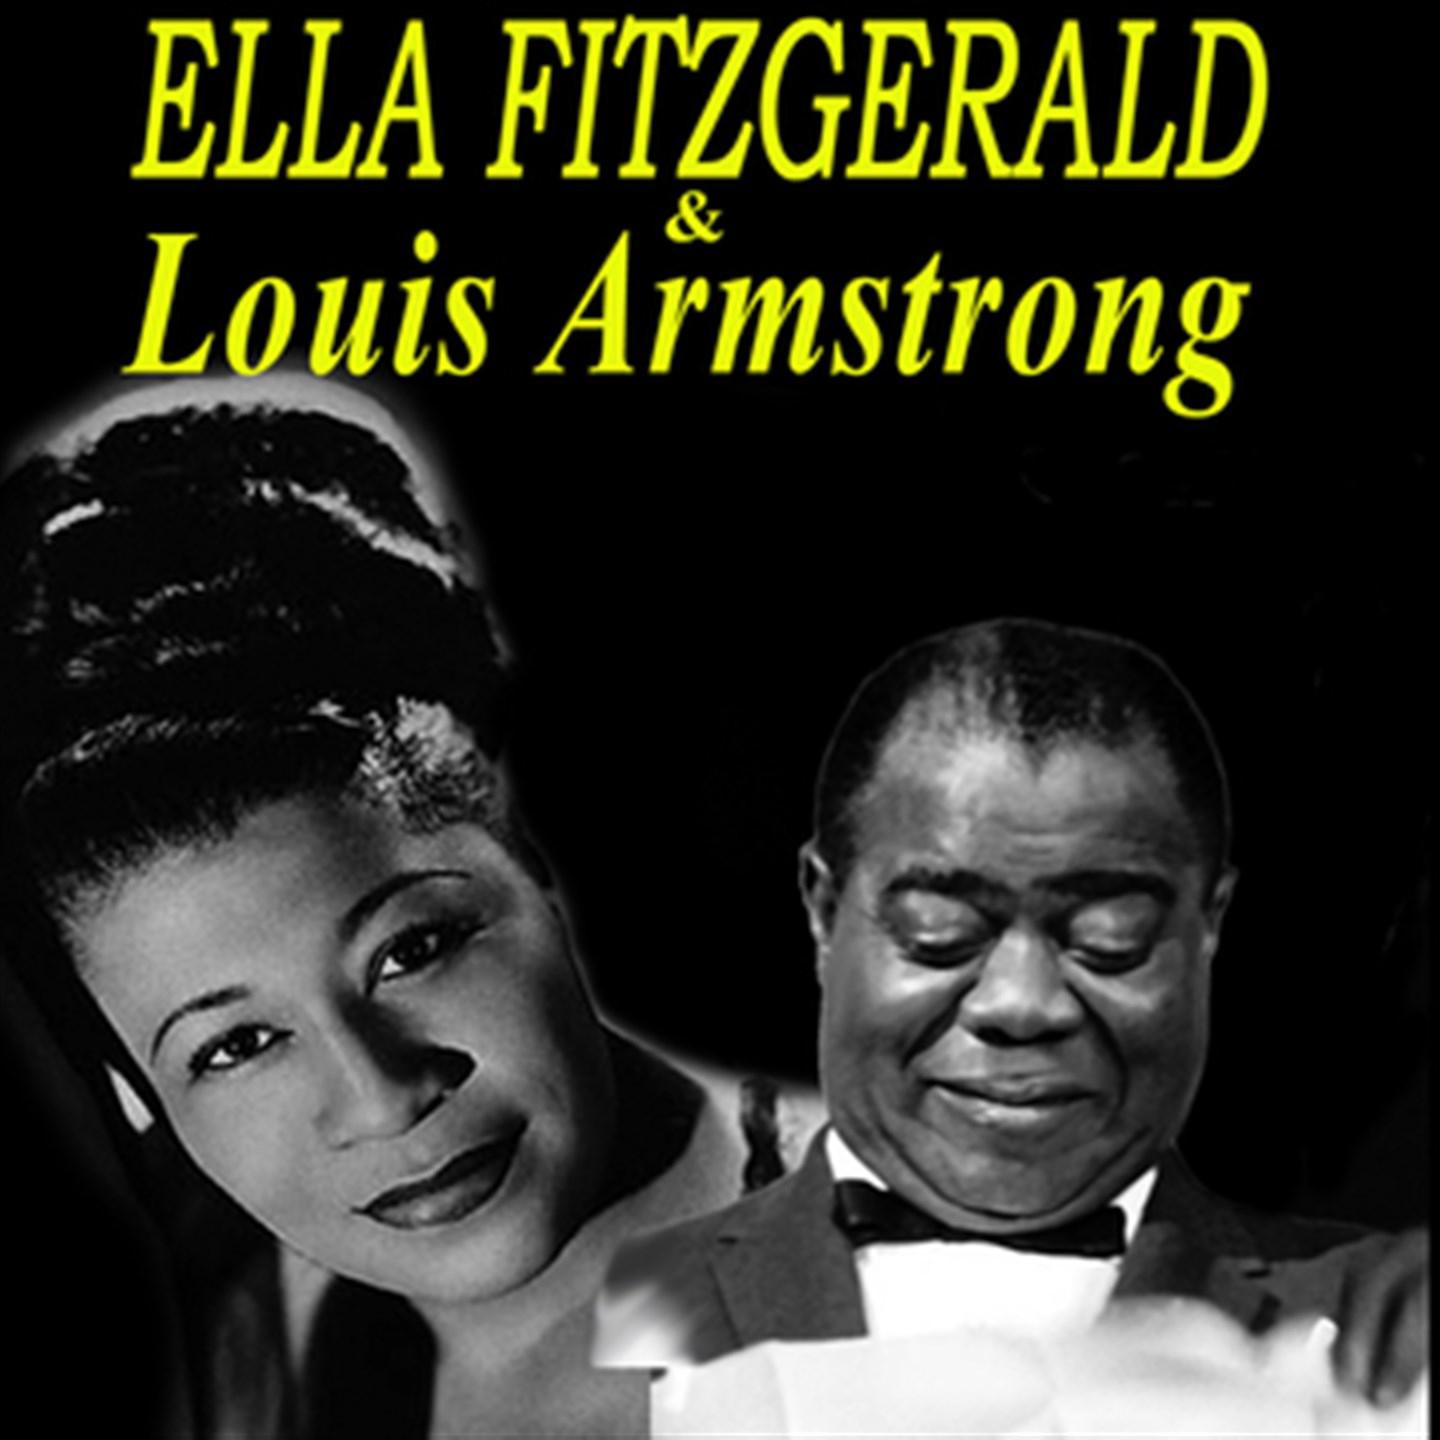 Ella fitzgerald & Louis Armstrong Deluxe (Remastered Edition)专辑